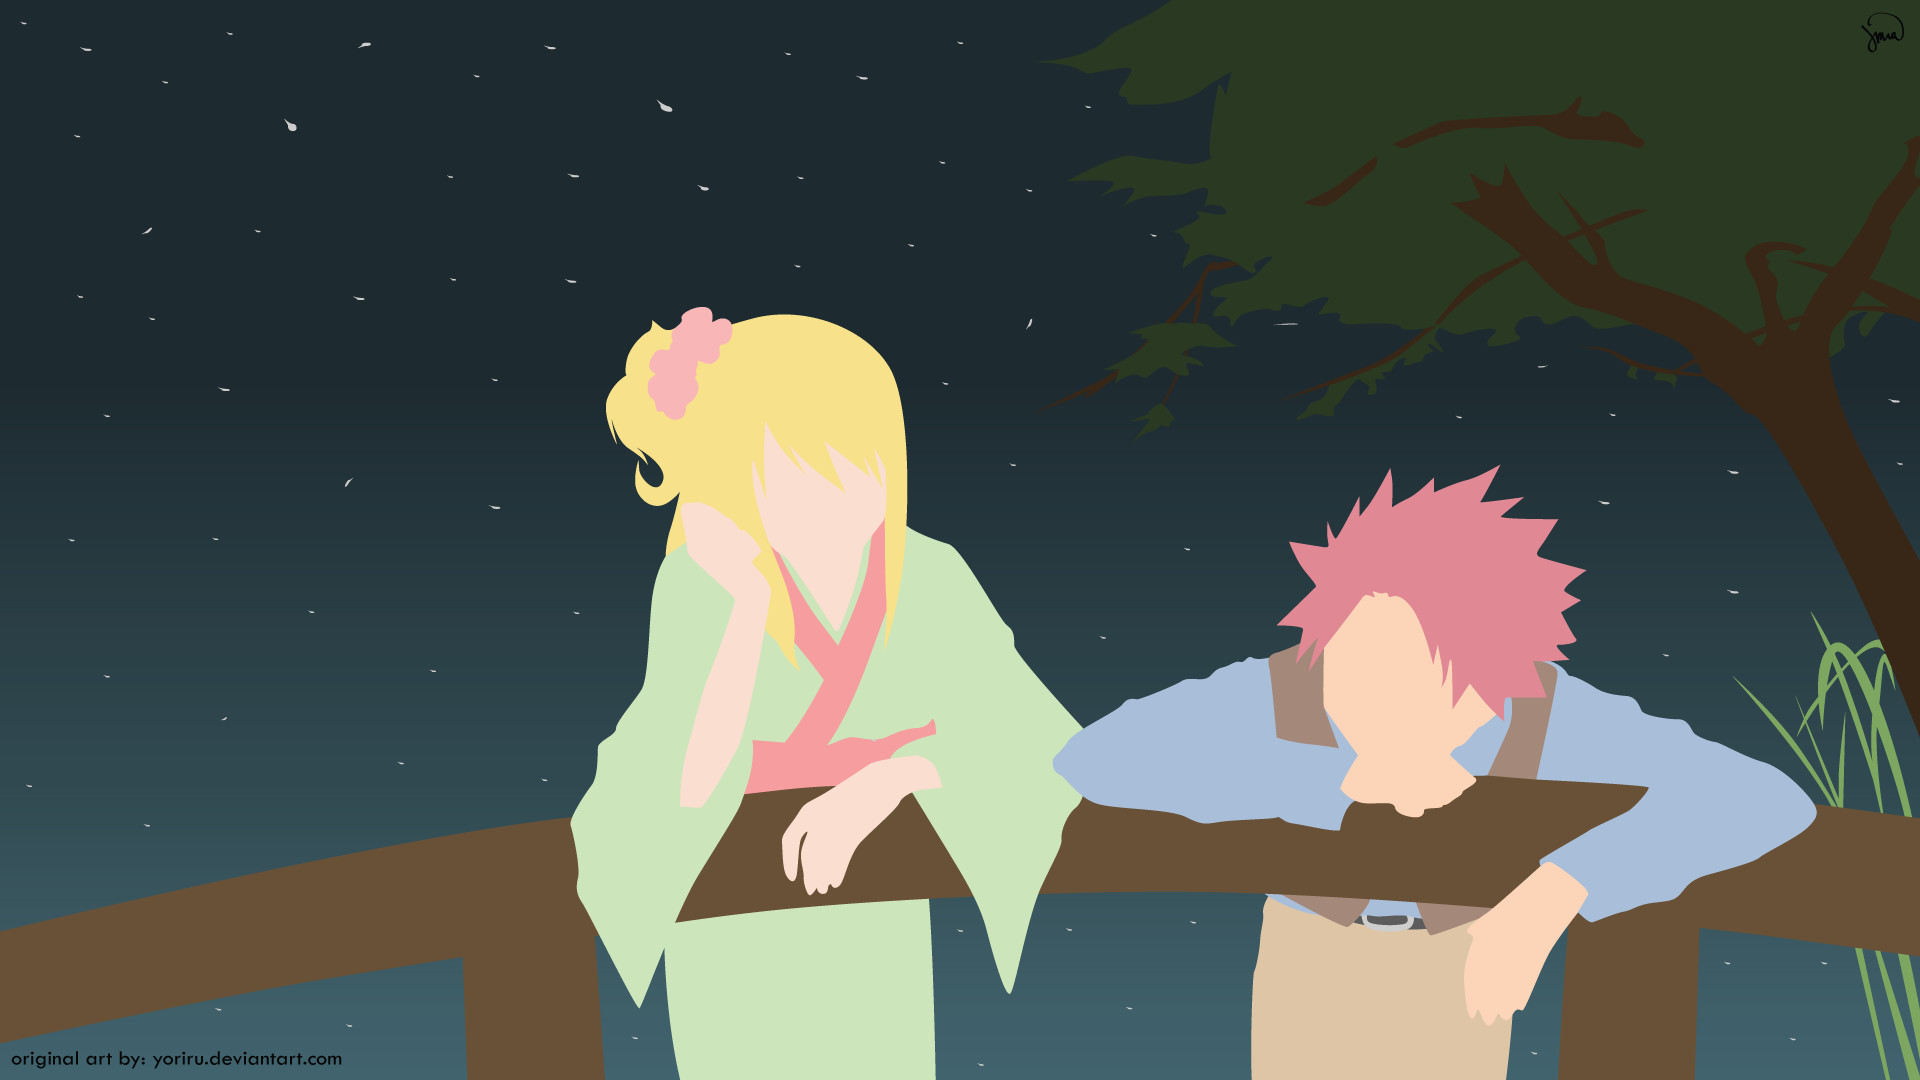 1920x1080 Natsu and Lucy Fairy Tail Minimalistic Wallpaper by greenmapple17